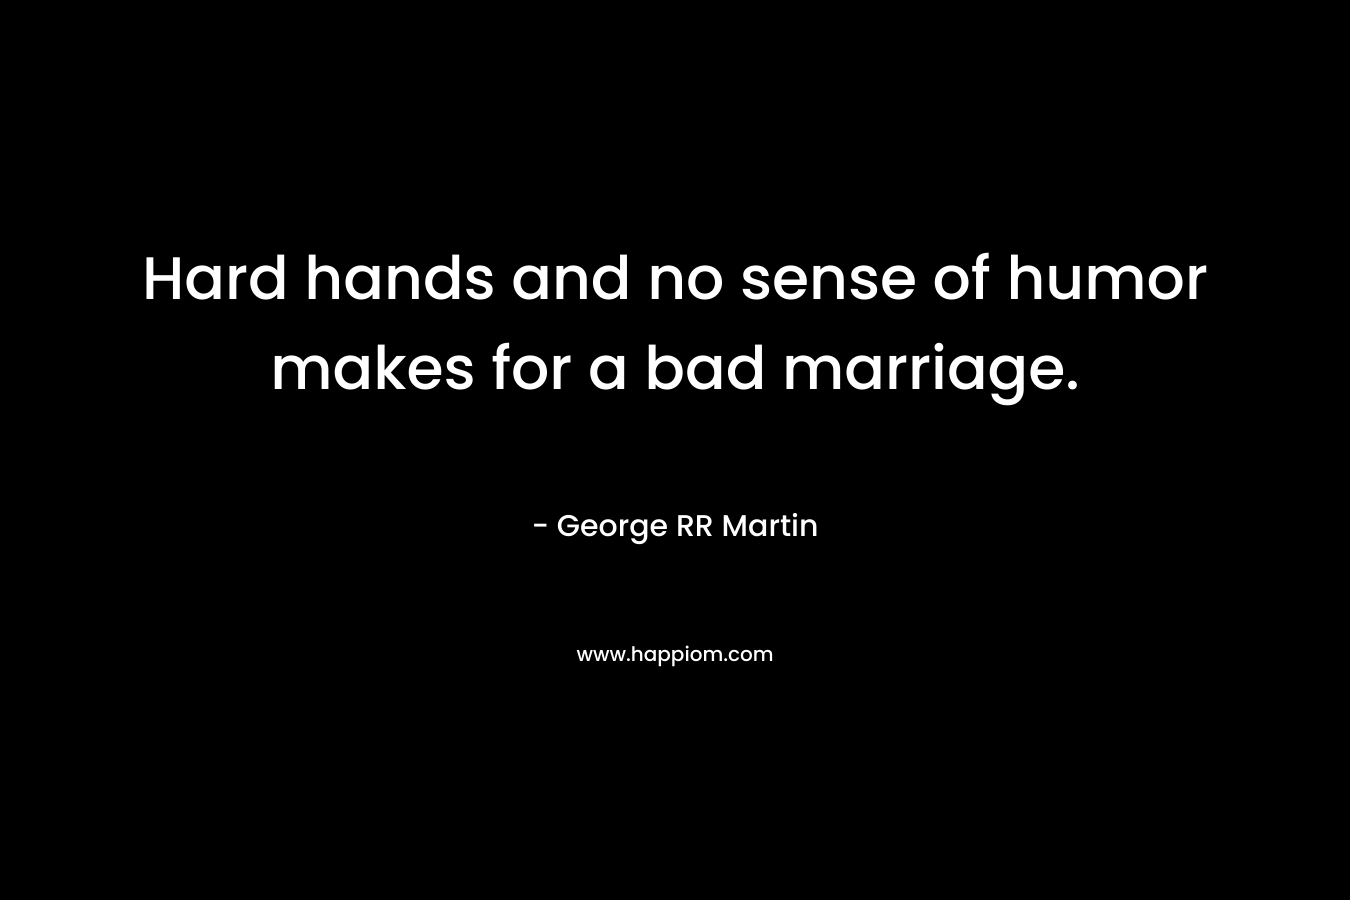 Hard hands and no sense of humor makes for a bad marriage.